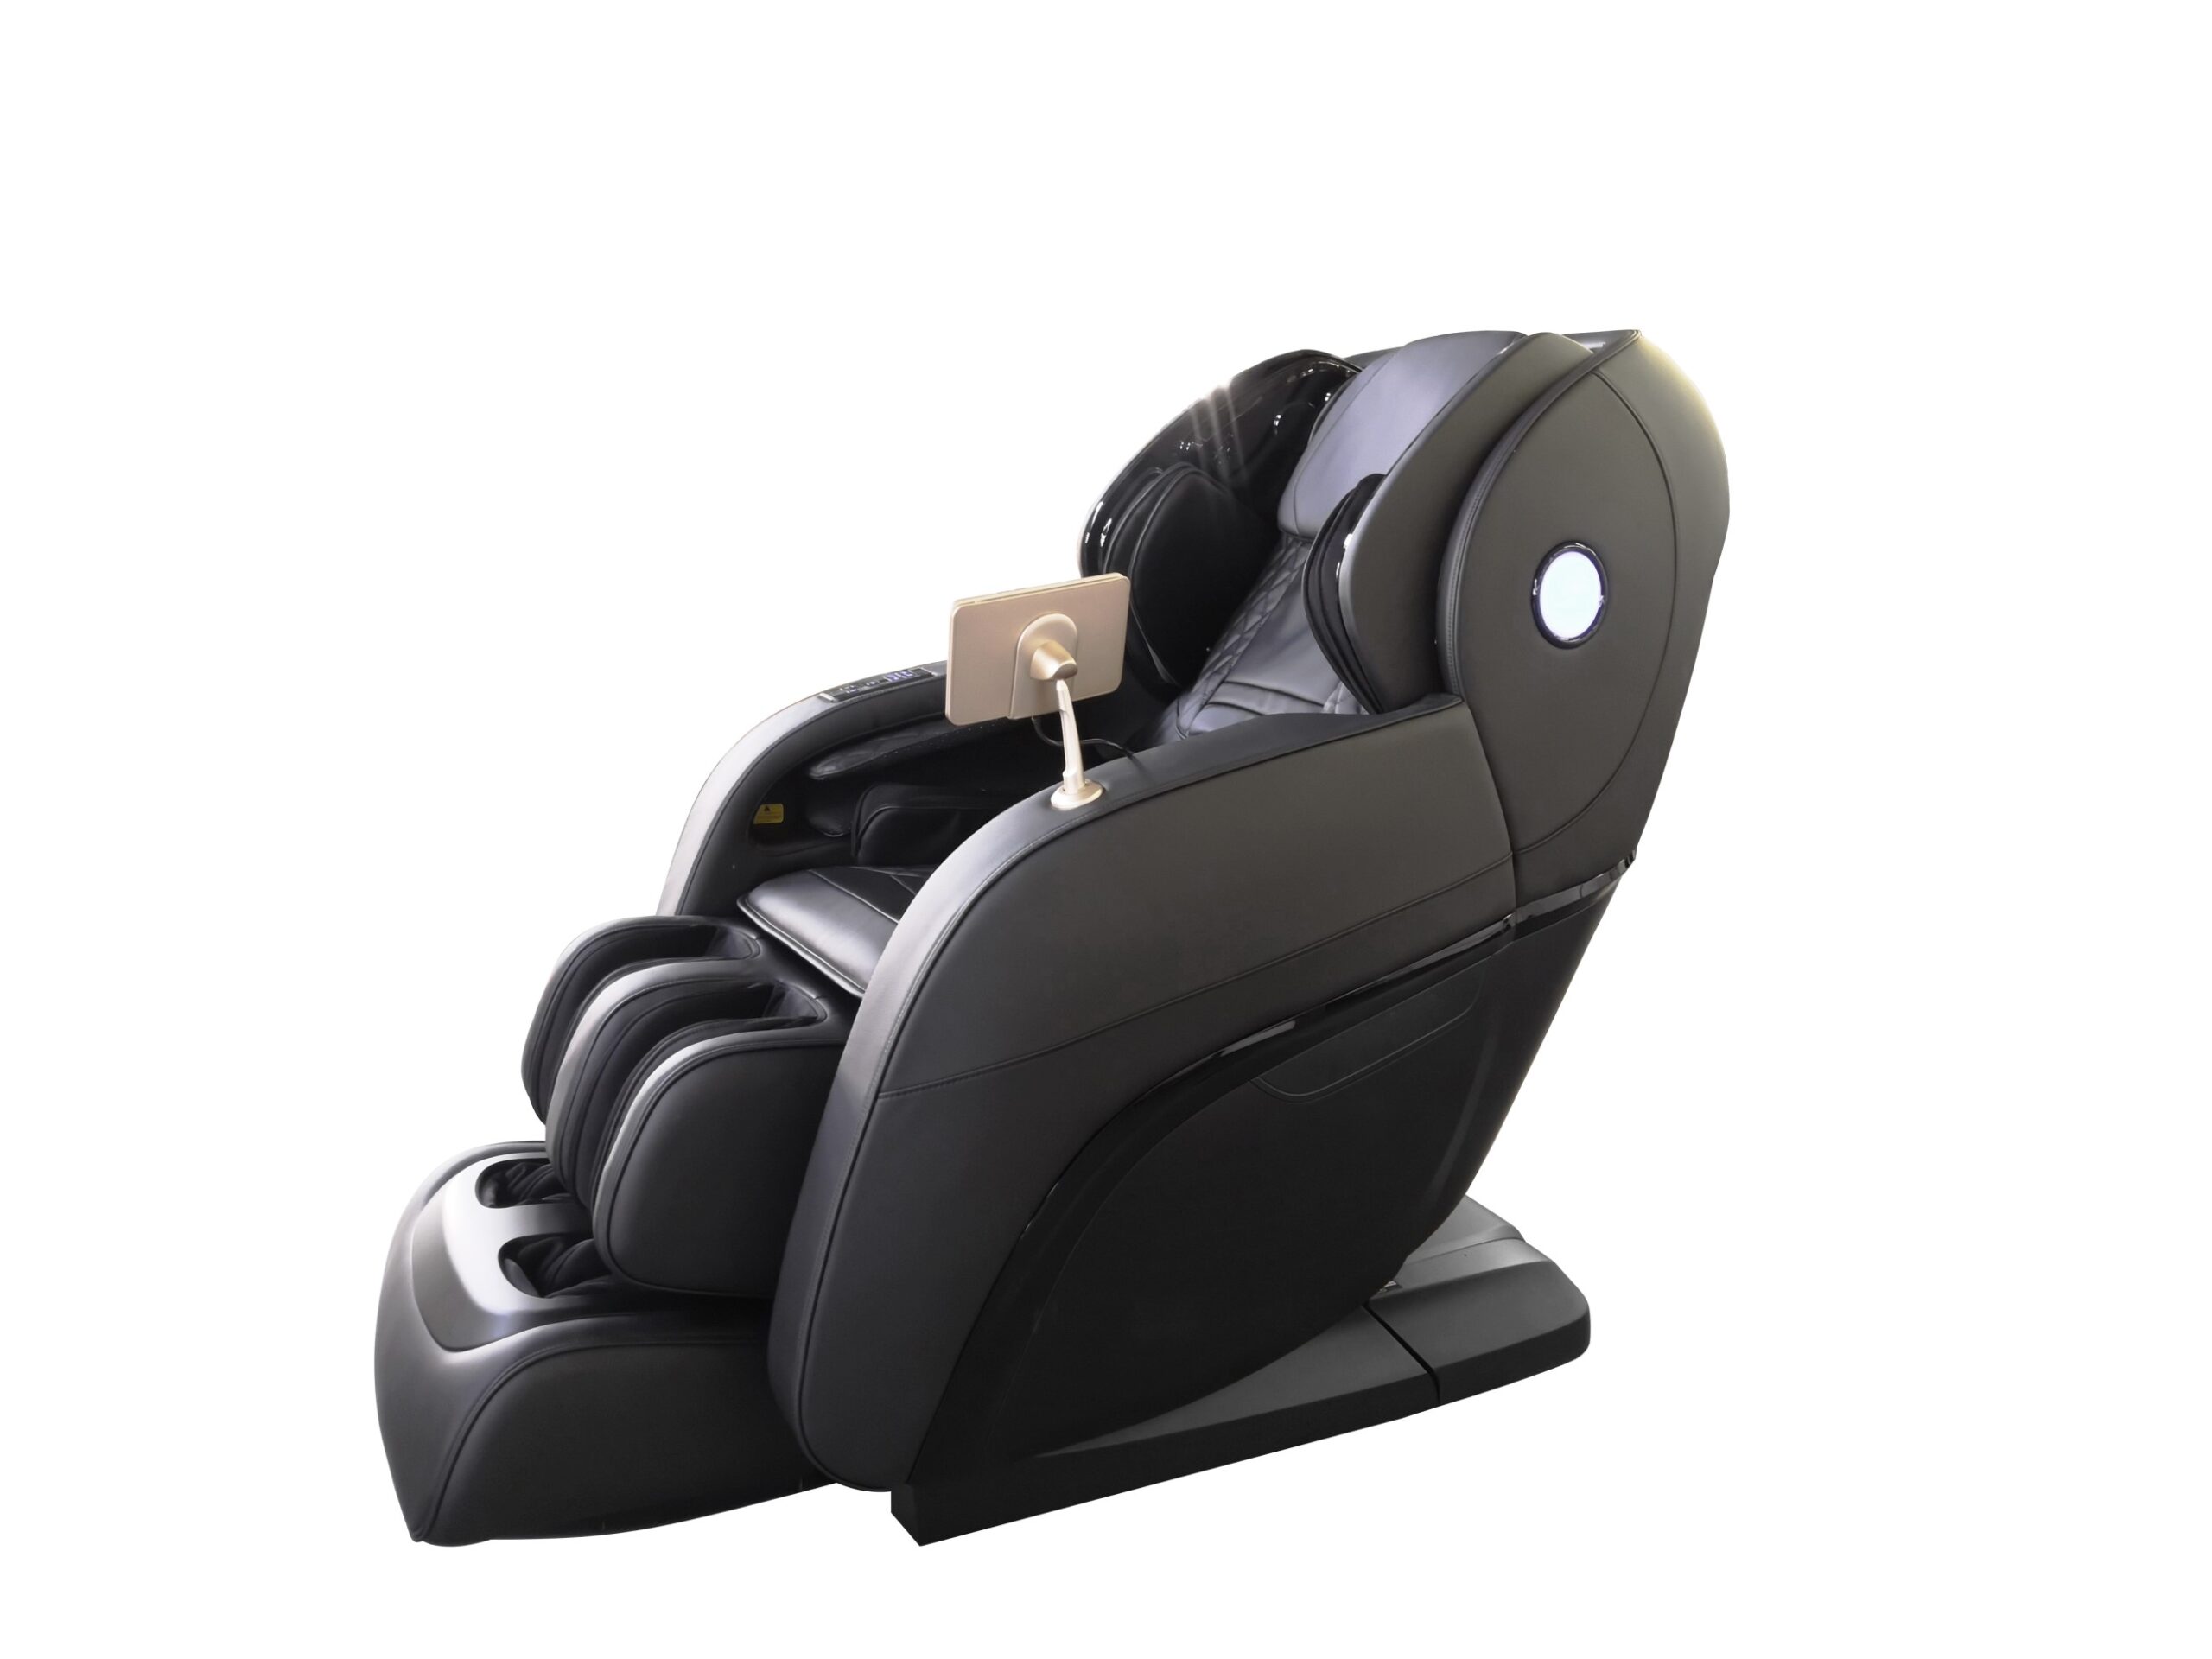 Medi Pro Physio 4d Bio Scan Massage Chair Relaxation Station